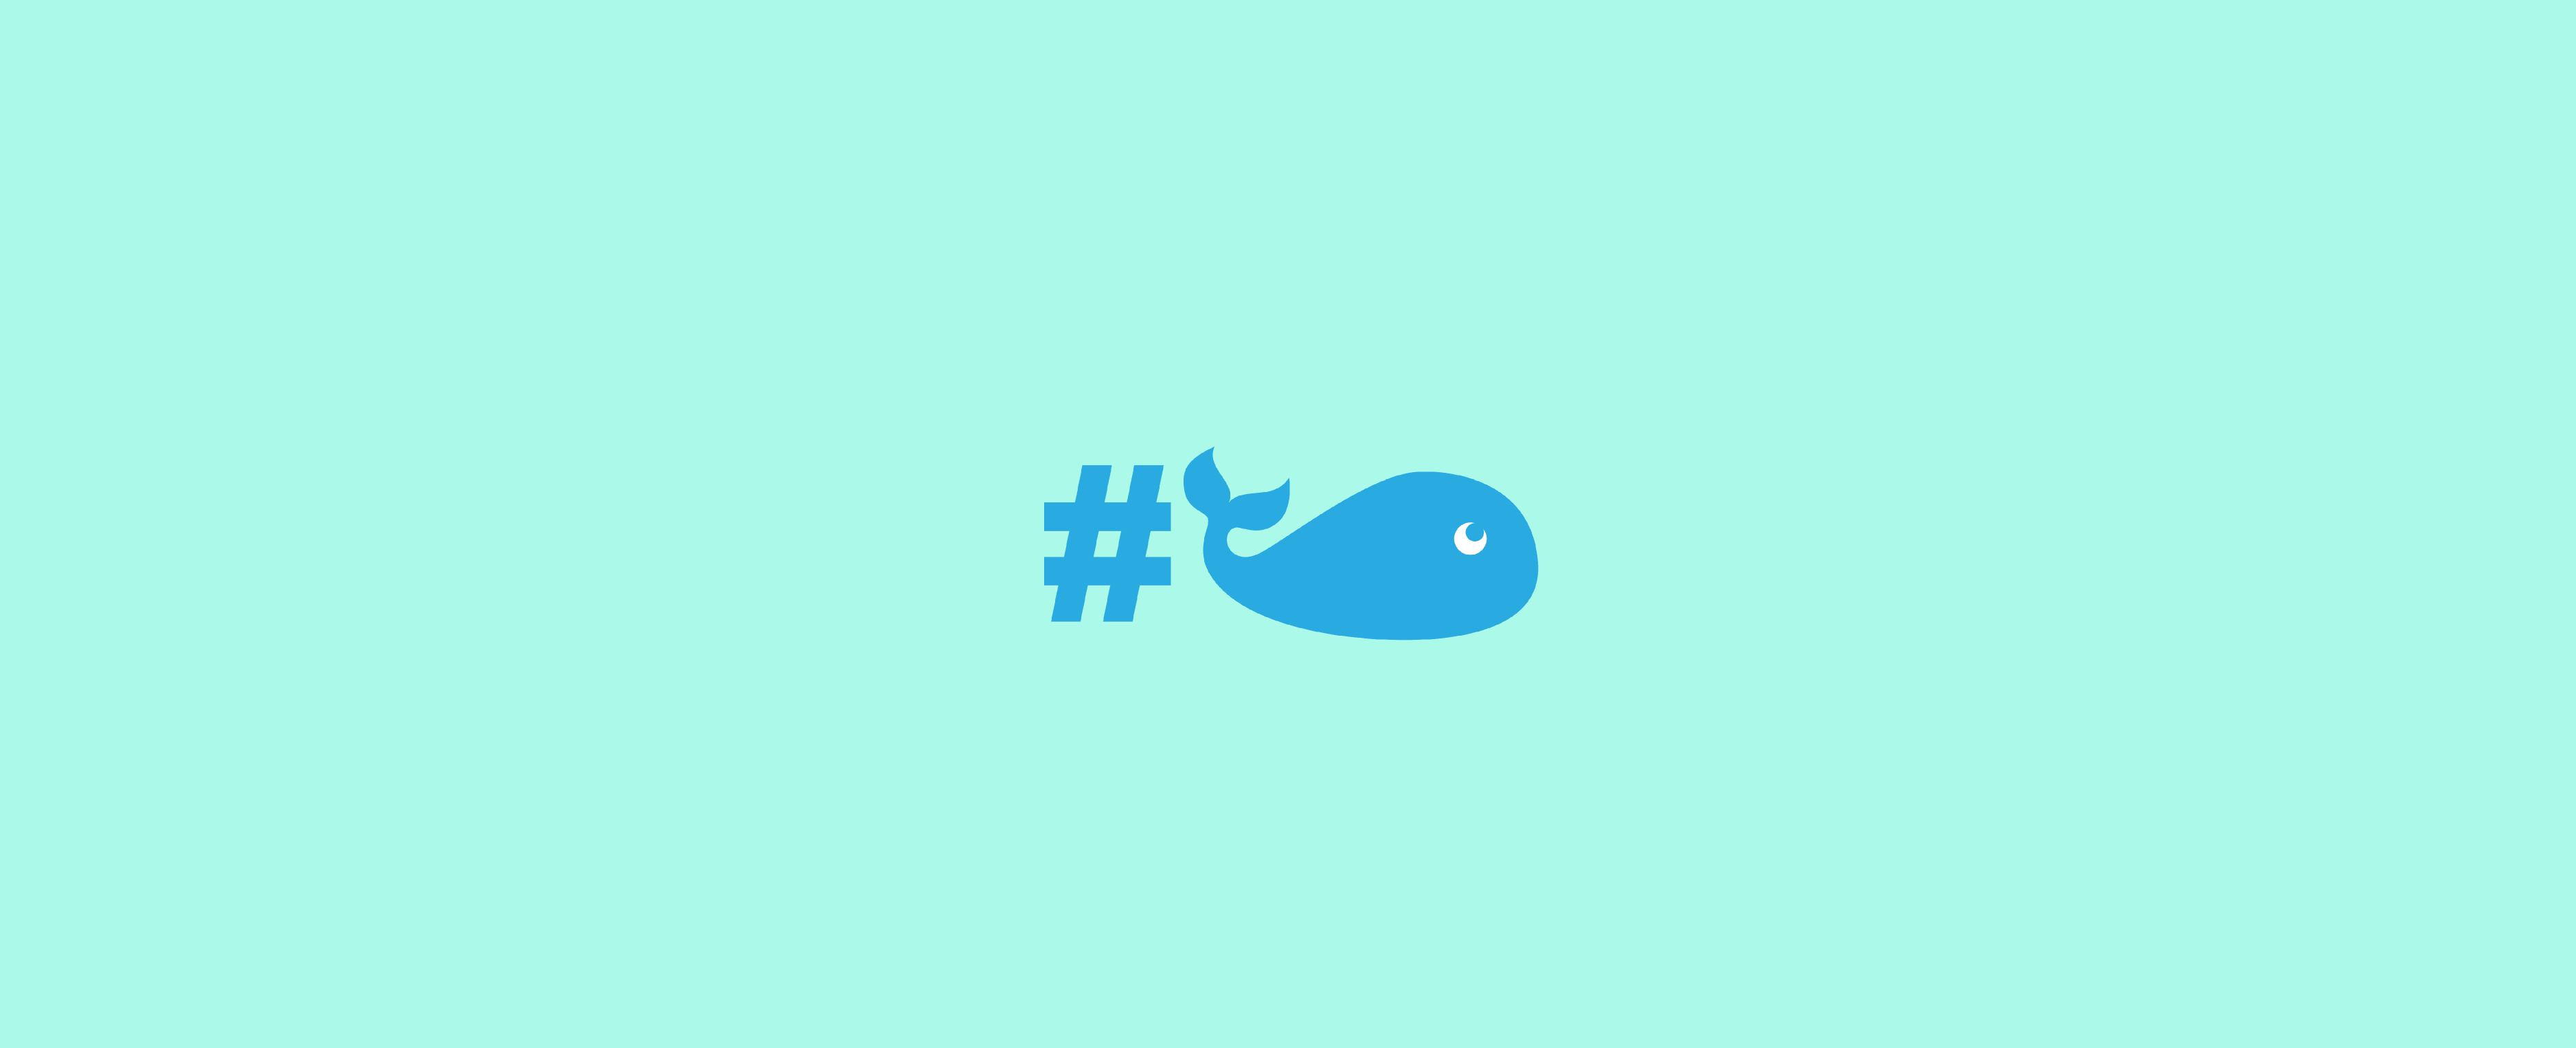 How To Design A Nonprofit Hashtag Campaign That Works Whole Whale